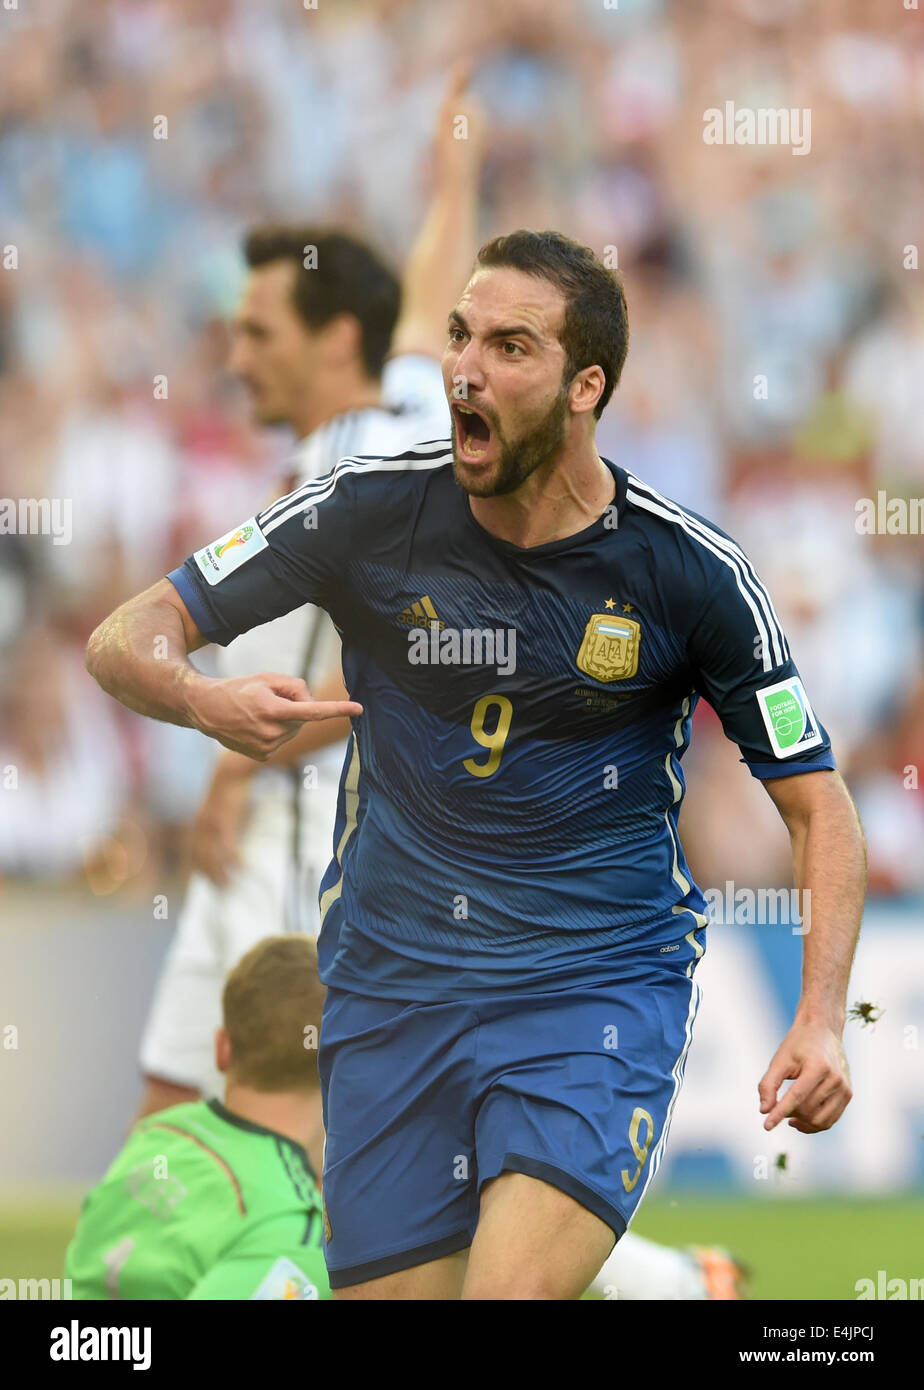 Rio de Janeiro, Brazil. 13th July, 2014. Gonzalo Higuain of Argentina reacts during the FIFA World Cup 2014 final soccer match between Germany and Argentina at the Estadio do Maracana in Rio de Janeiro, Brazil, 13 July 2014. Photo: Andreas Gebert/dpa/Alamy Live News Stock Photo